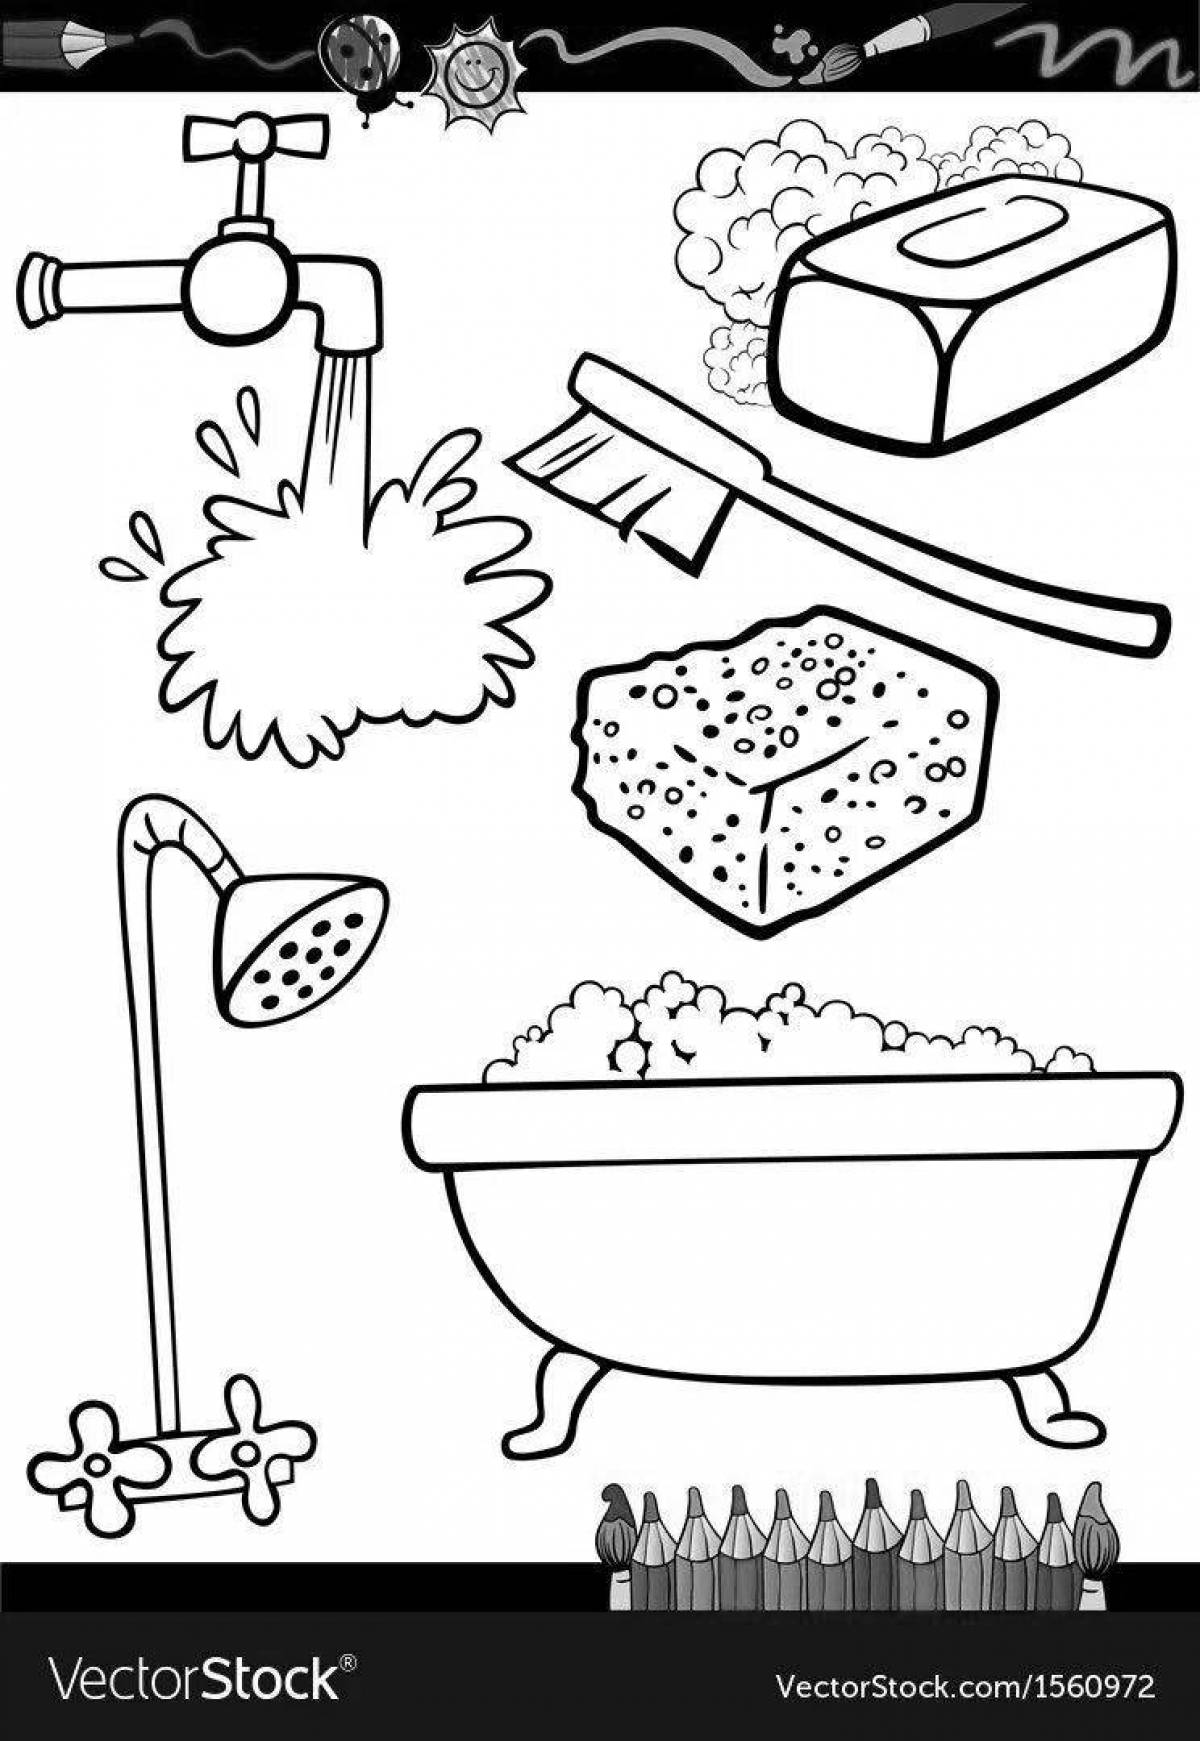 Great hygiene items coloring page